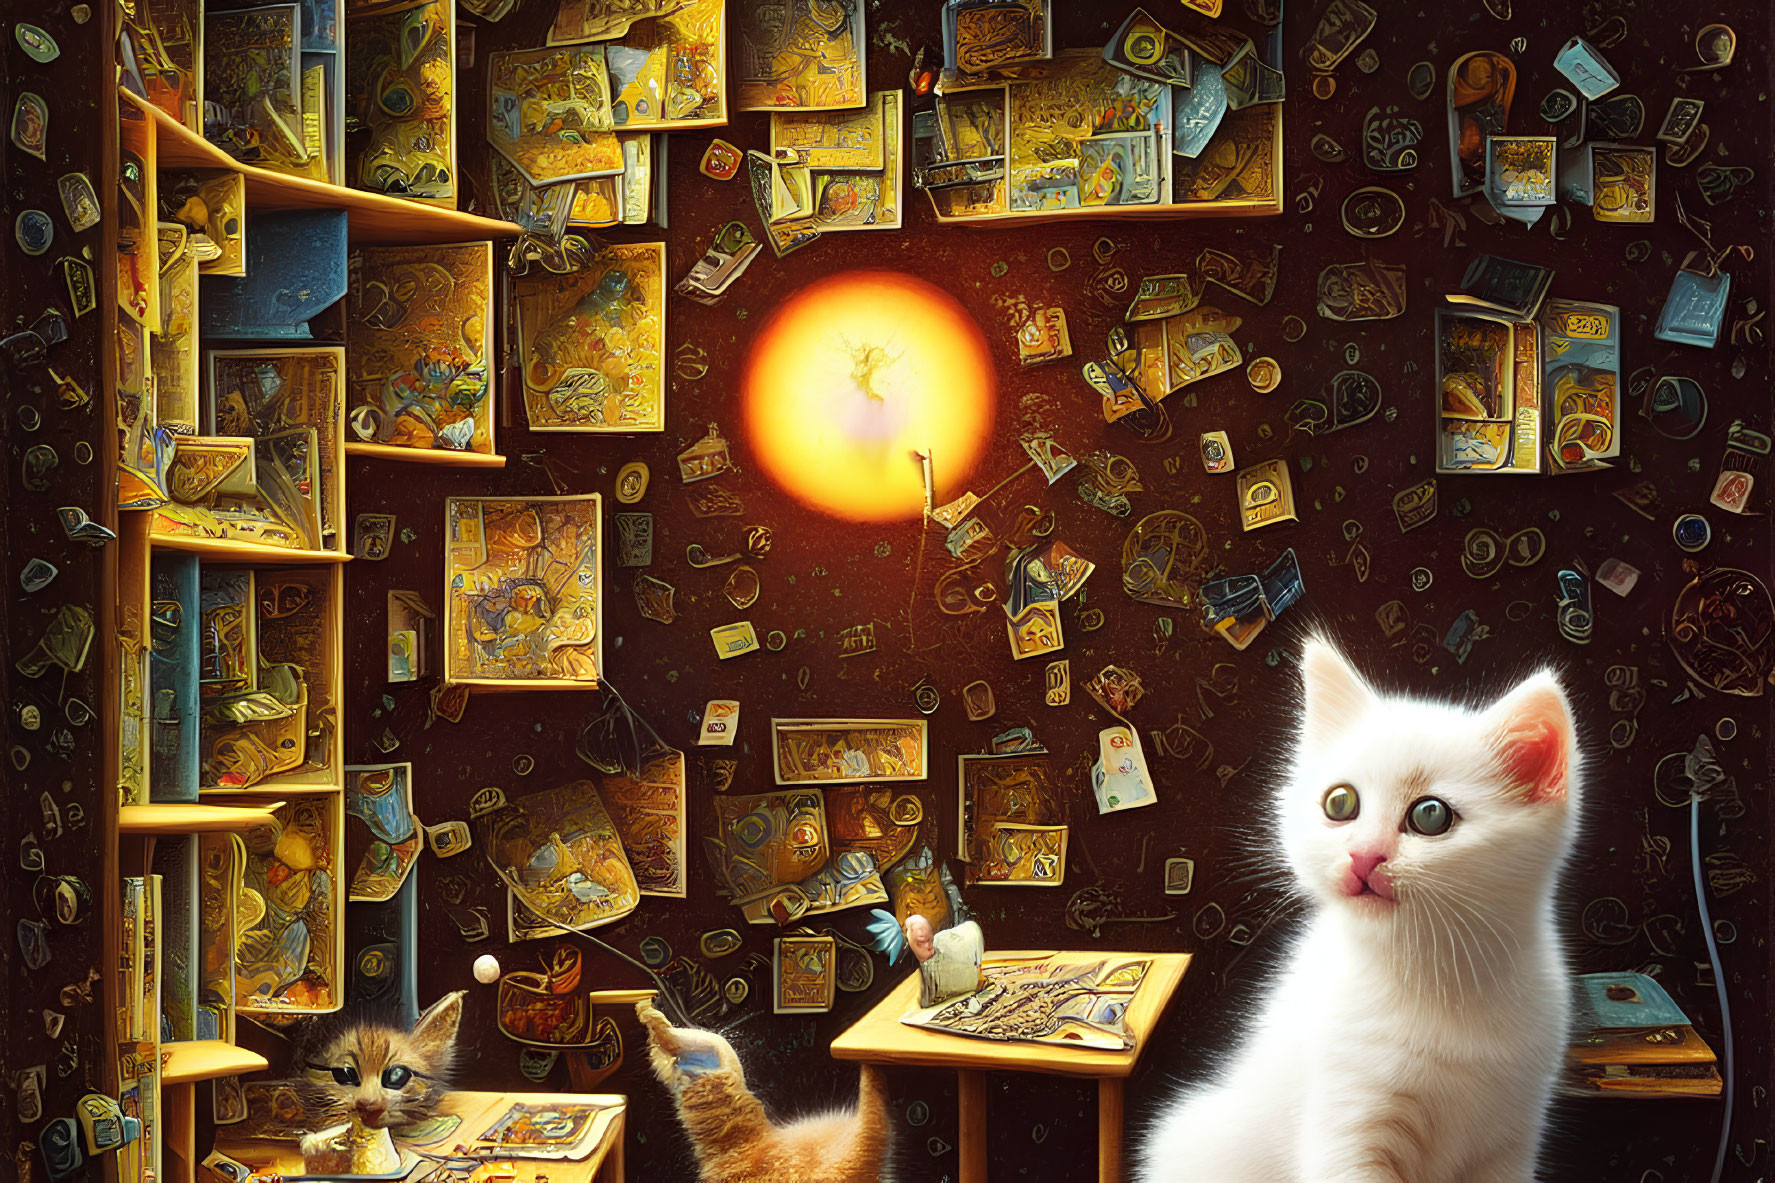 Whimsical room with flying books and glowing illustrations featuring a curious white kitten